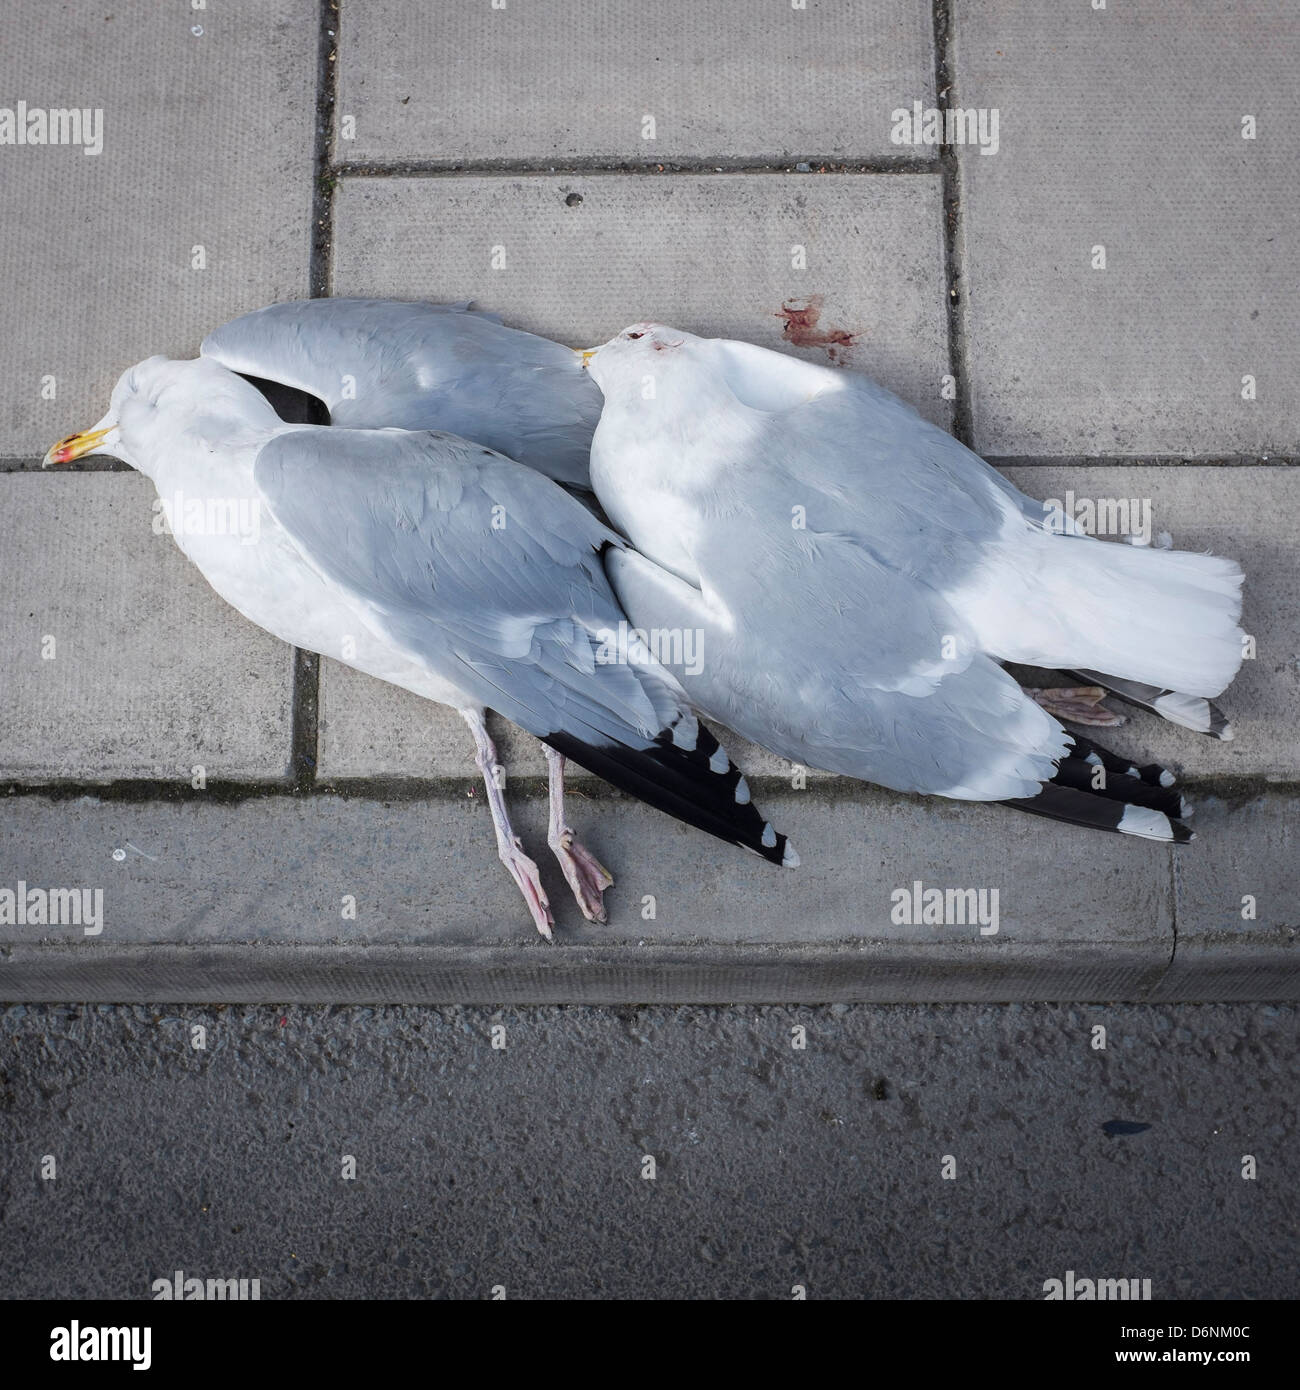 Two dead seagulls lying on the pavement sidewalk, apparently shot. UK Stock Photo